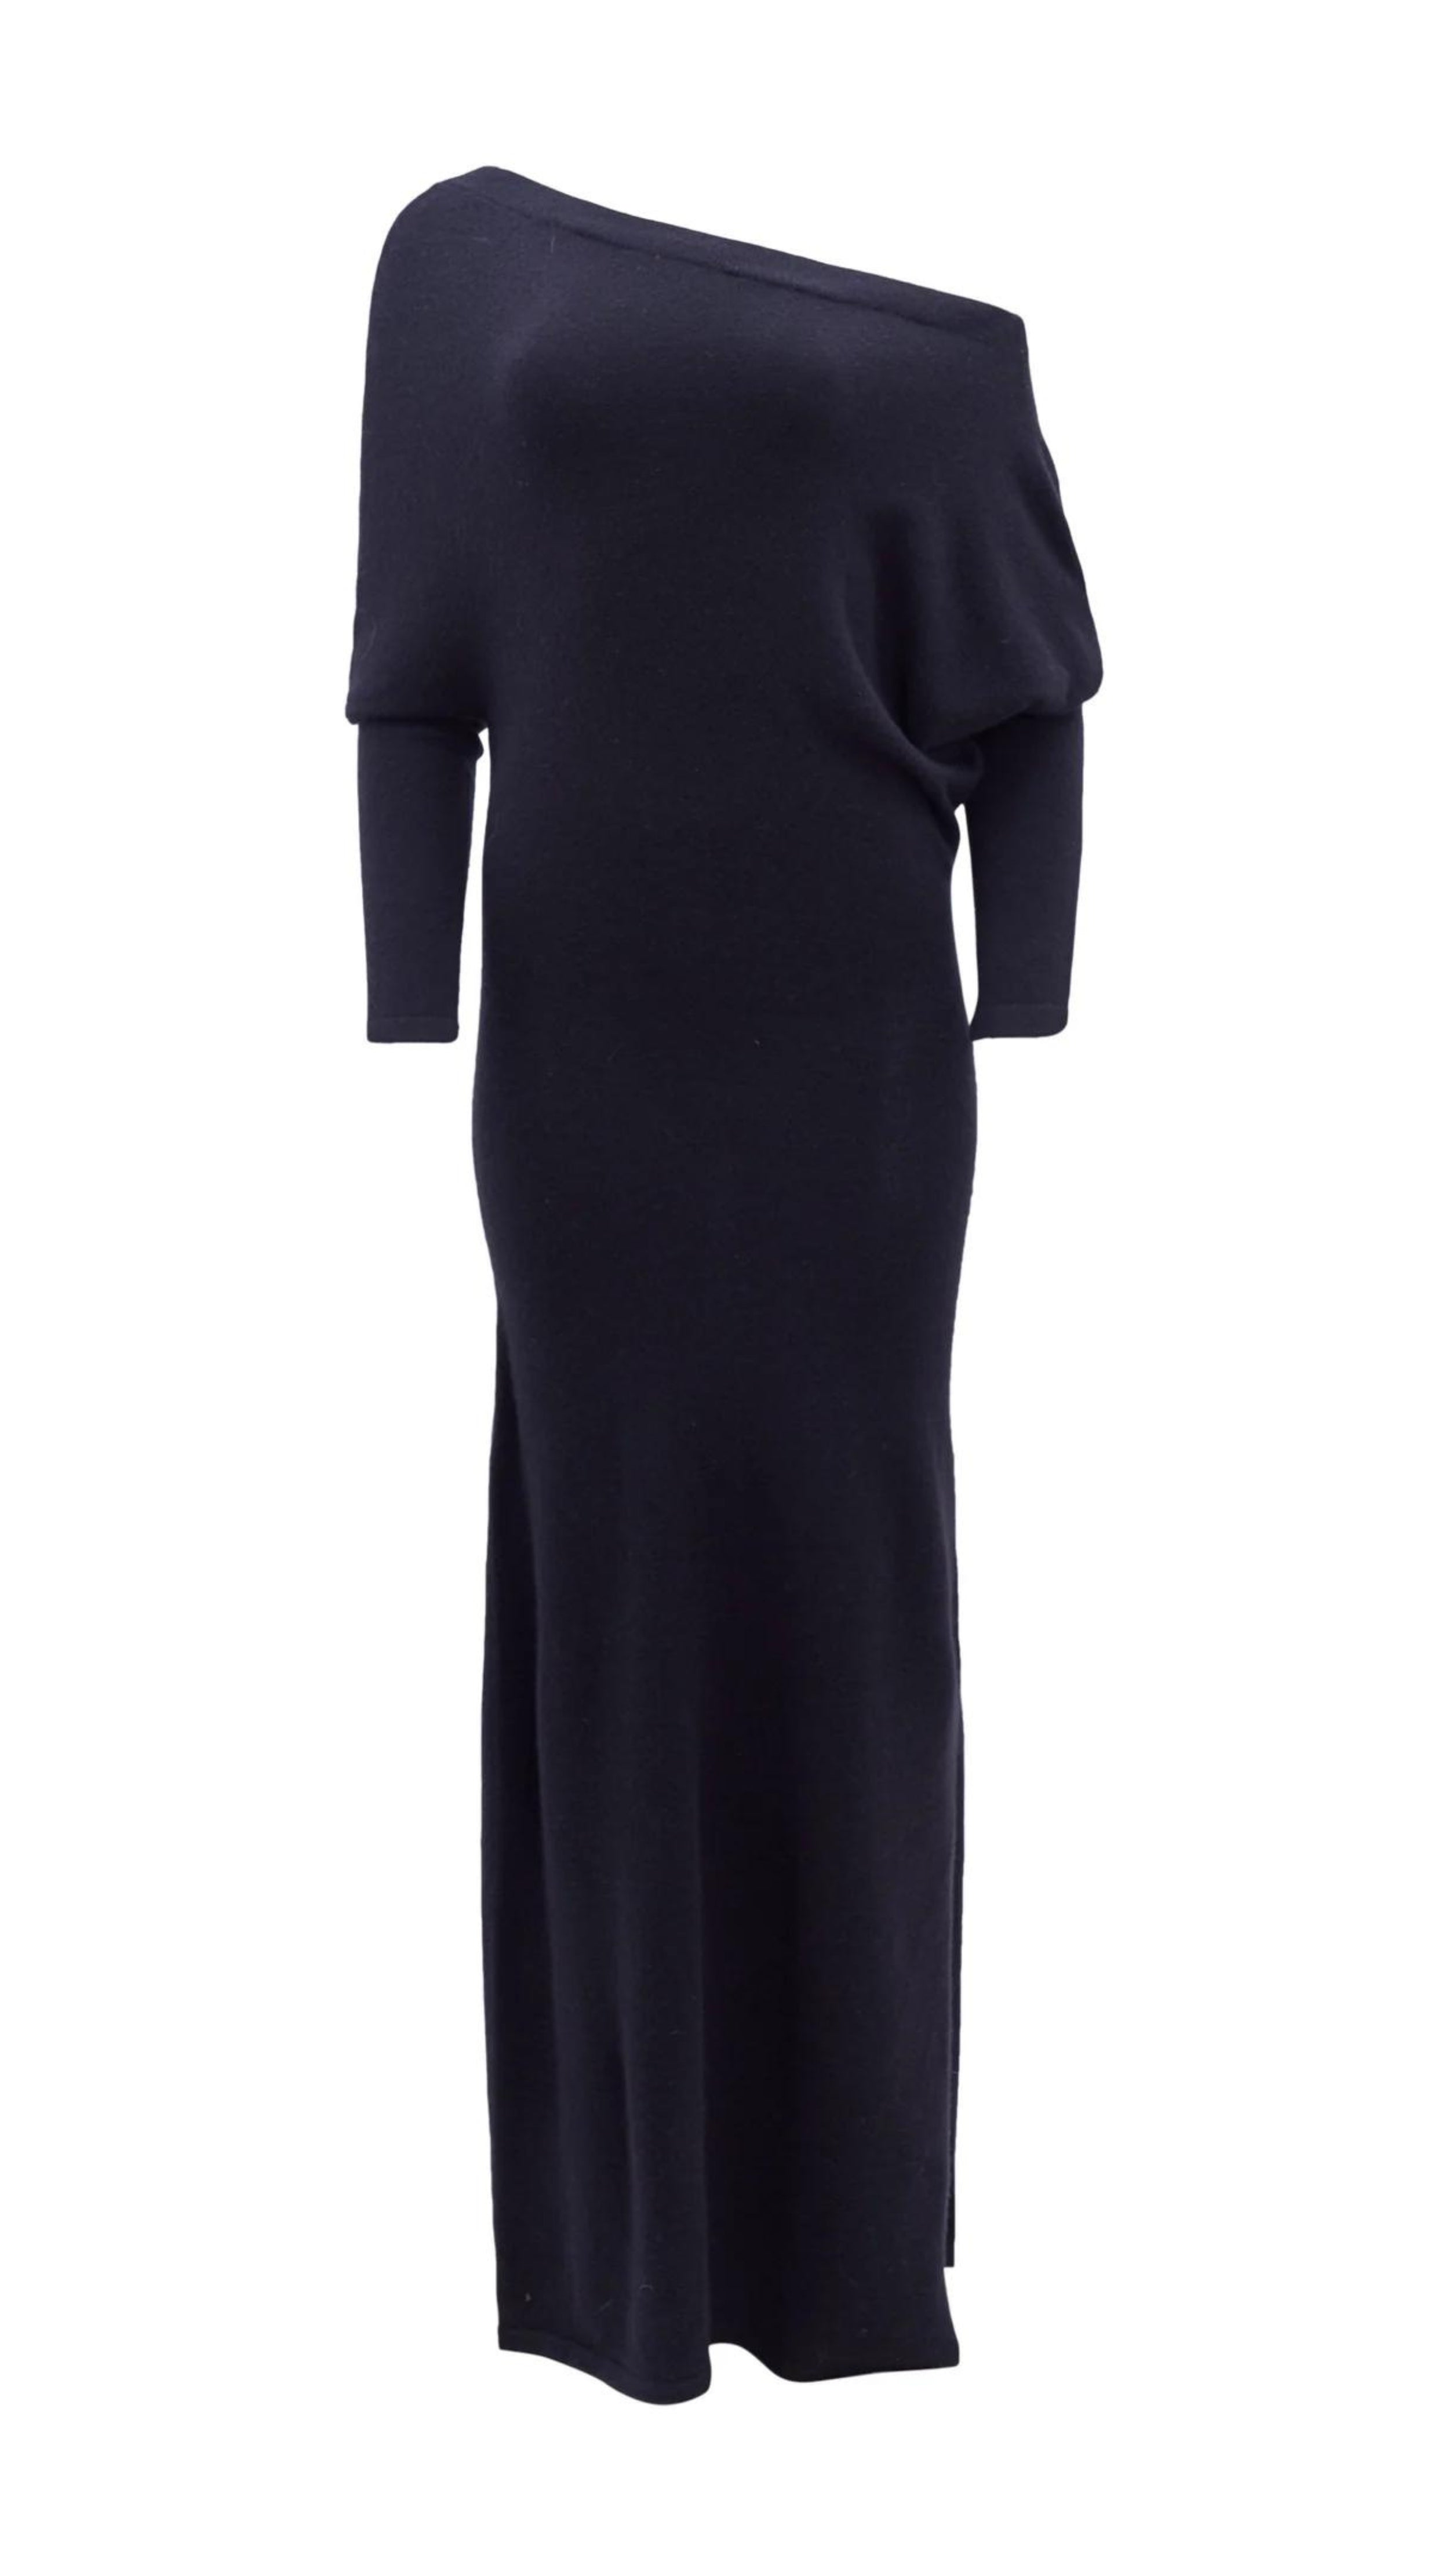 Altuzarra Black Cashmere Kasos Dress. The dress features an oversized off-the-shoulder top, slim long sleeves, an ankle-length skirt with a side slit hem. Off duty ballerina elegance in the style. Photo shows product photo facing front.